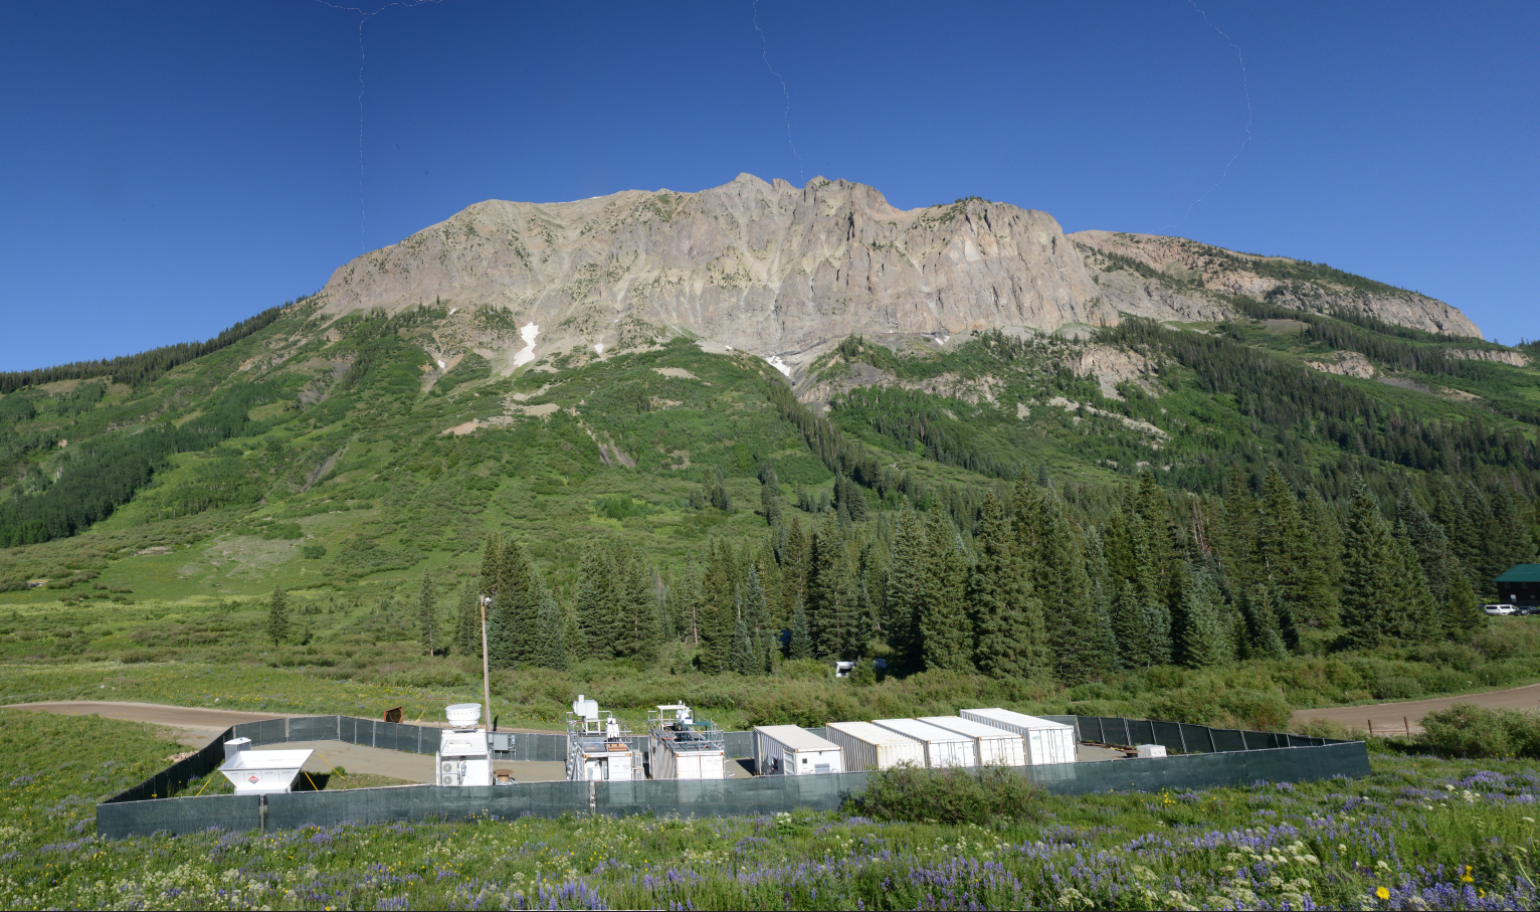 ARM Mobile Facility containers and instruments are situated inside a fence. The photo, taken on a sunny day, also shows a mountain with patchy snow and trees populating the lower half of the mountainside.